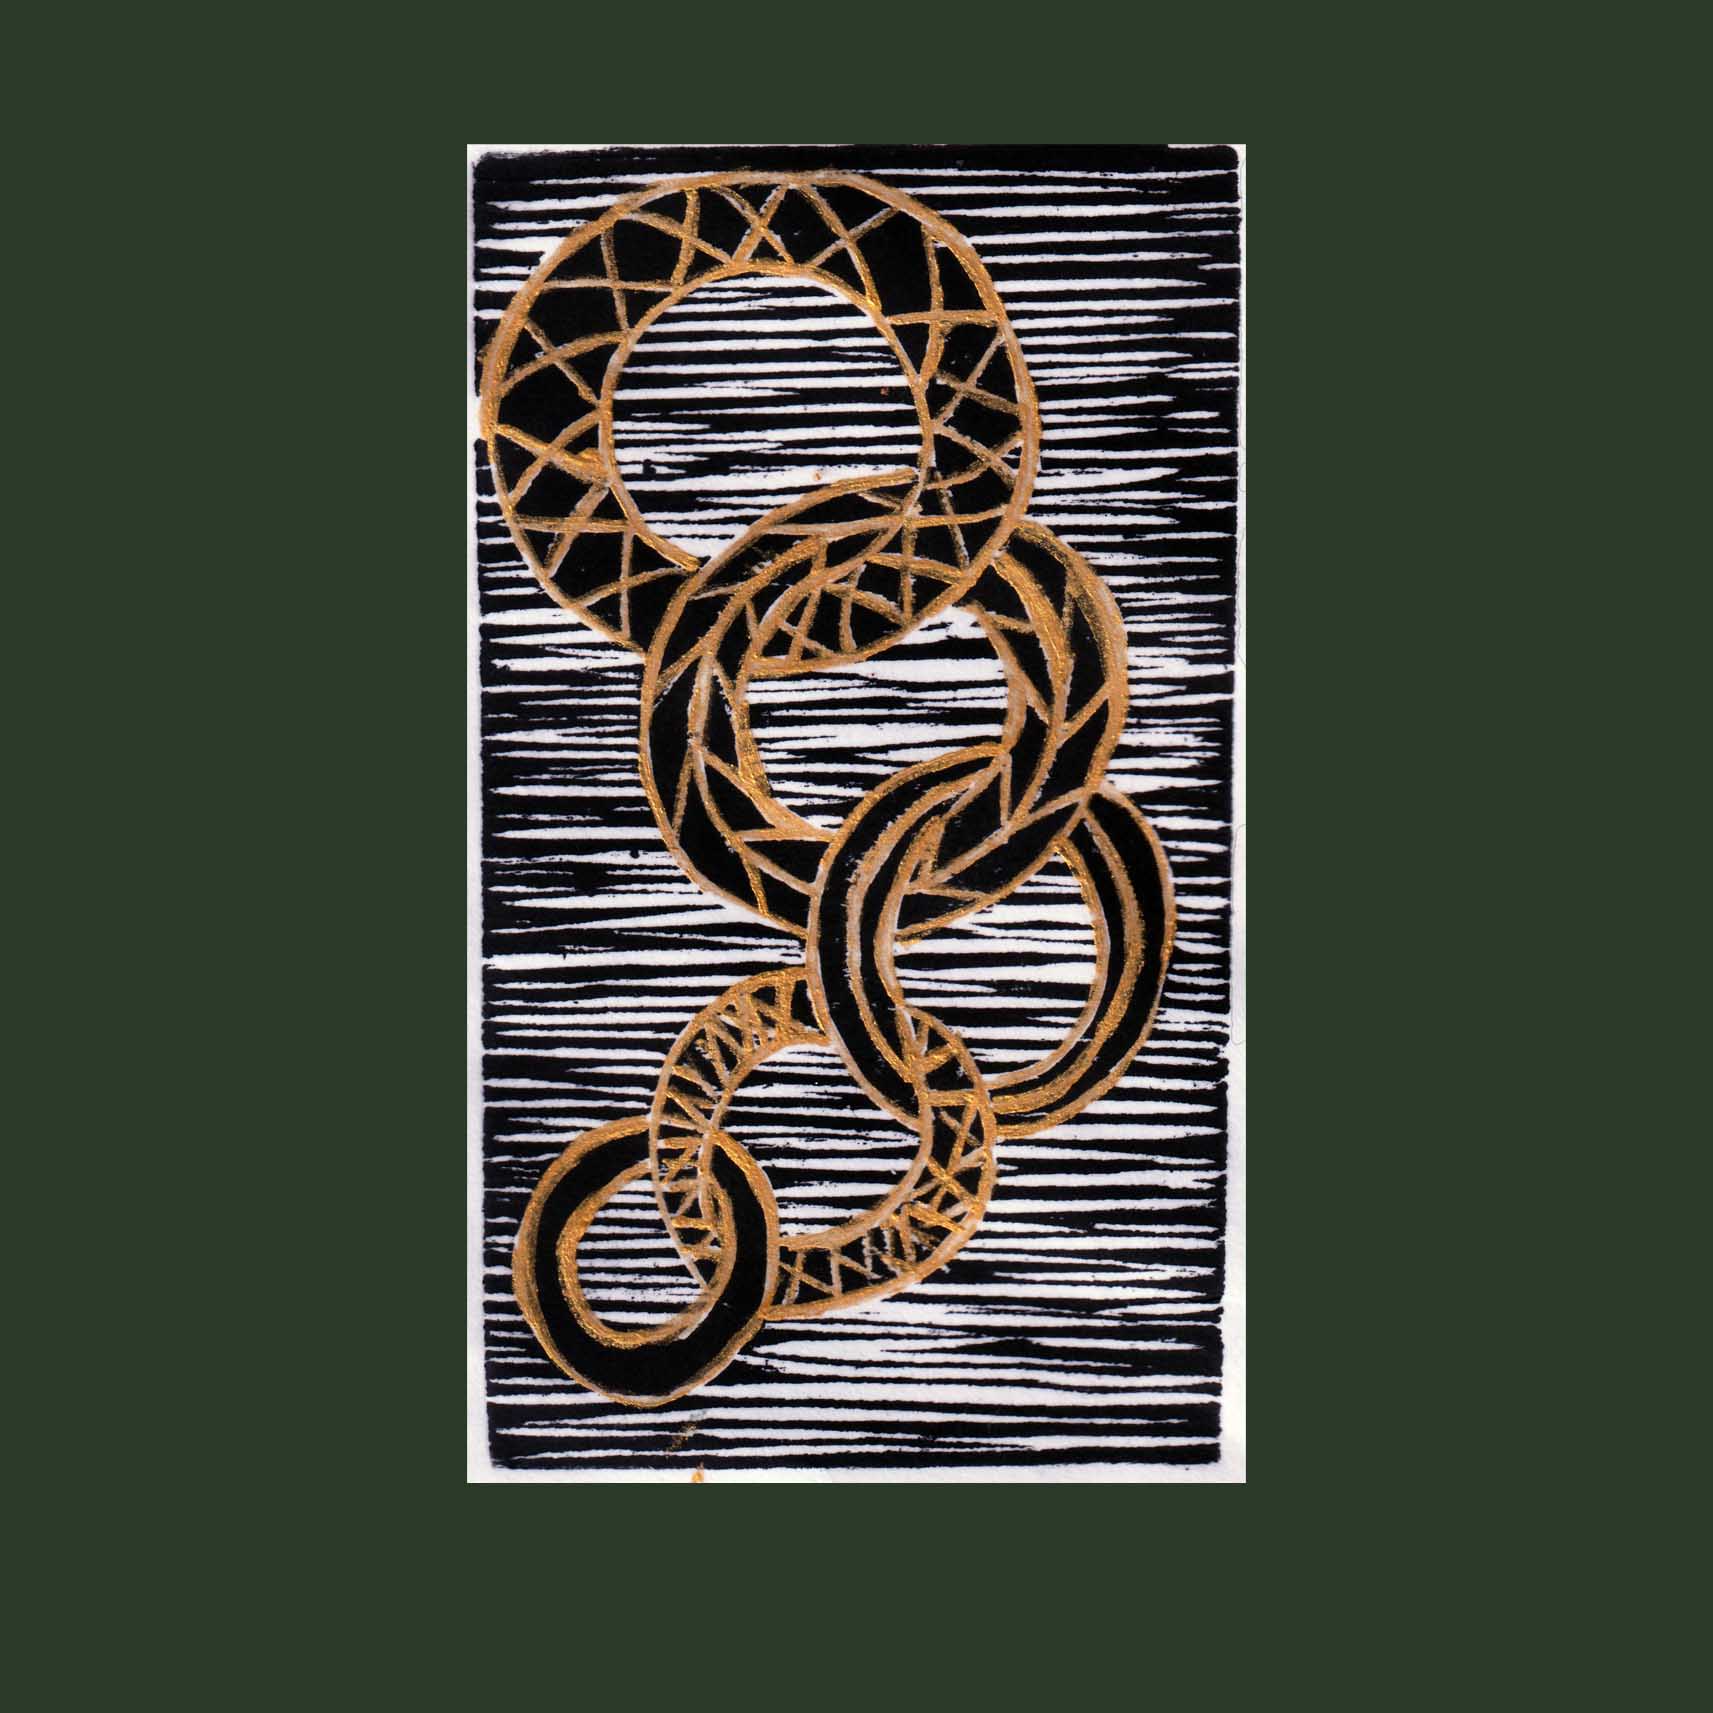 woodcut print 5 gold rings - black white gold - Christmas card green back ground